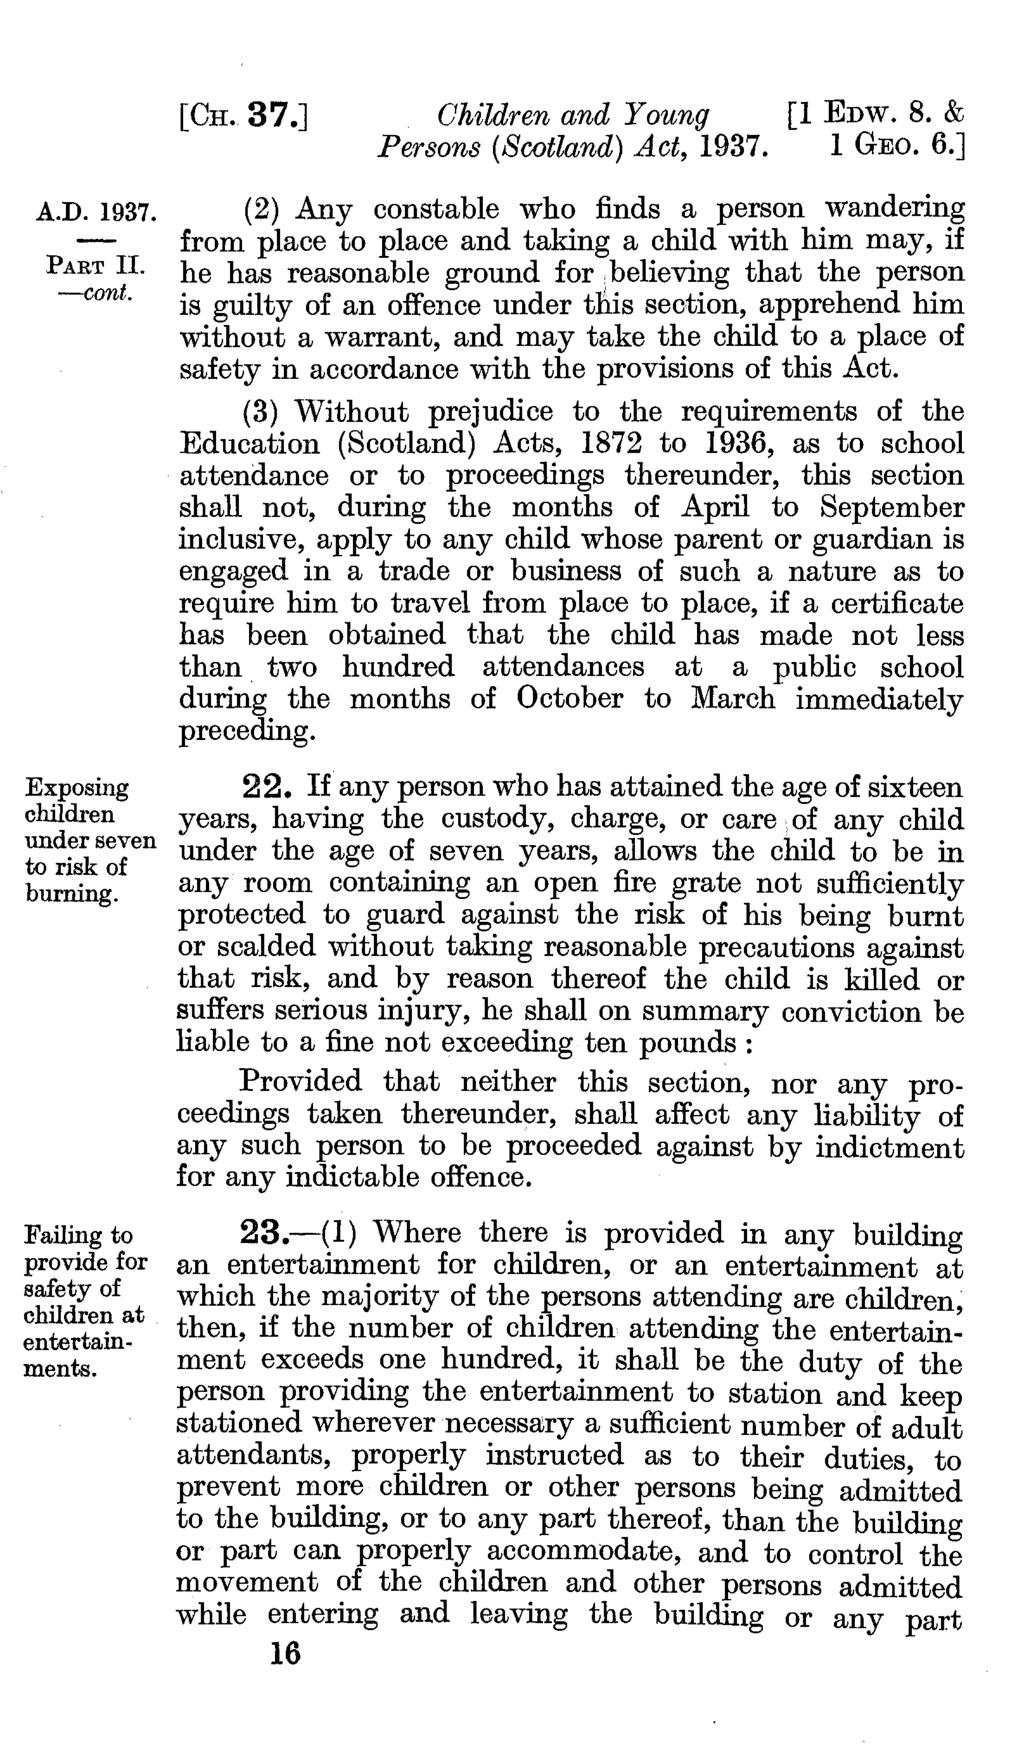 PART II. Exposing children under seven to risk of burning. Failing to provide for safety of children at entertainments. [Cu.. 37.] Children and Young [1 EDW. 8. & Persons (Scotland) Act, 1937. 1 GEO.